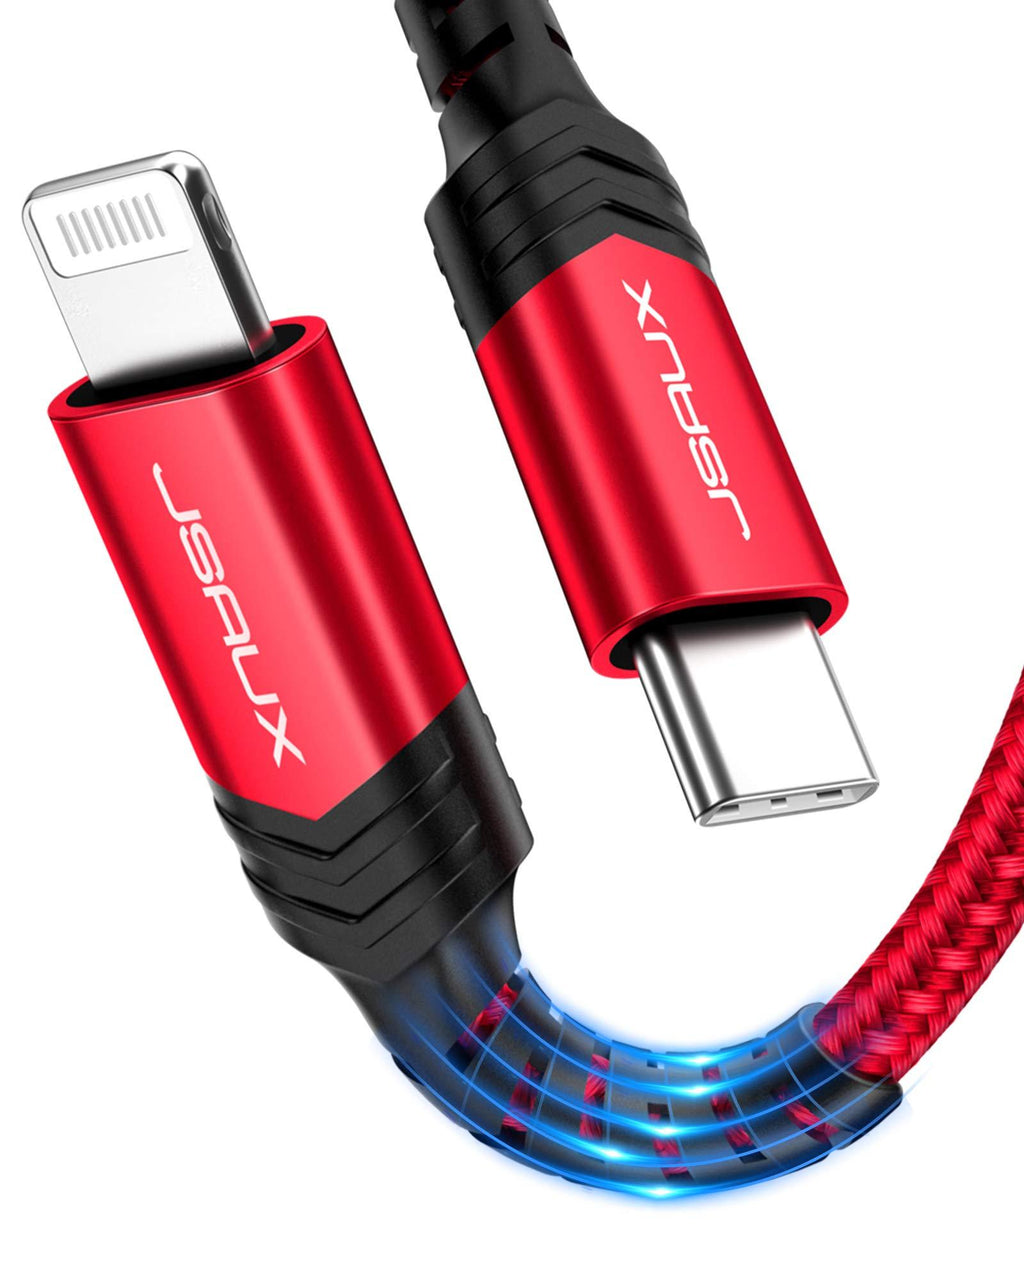 USB C to Lightning Cable, JSAUX 6FT [Apple MFi Certified] iPhone 13 Fast Charging Cord USB C iPhone Cable for iPhone 13/13 Pro/13 Pro Max/12/12 Mini/12 Pro Max/11 Pro Max/X/XS/XR/8, iPad 8, Airpods Red - LeoForward Australia